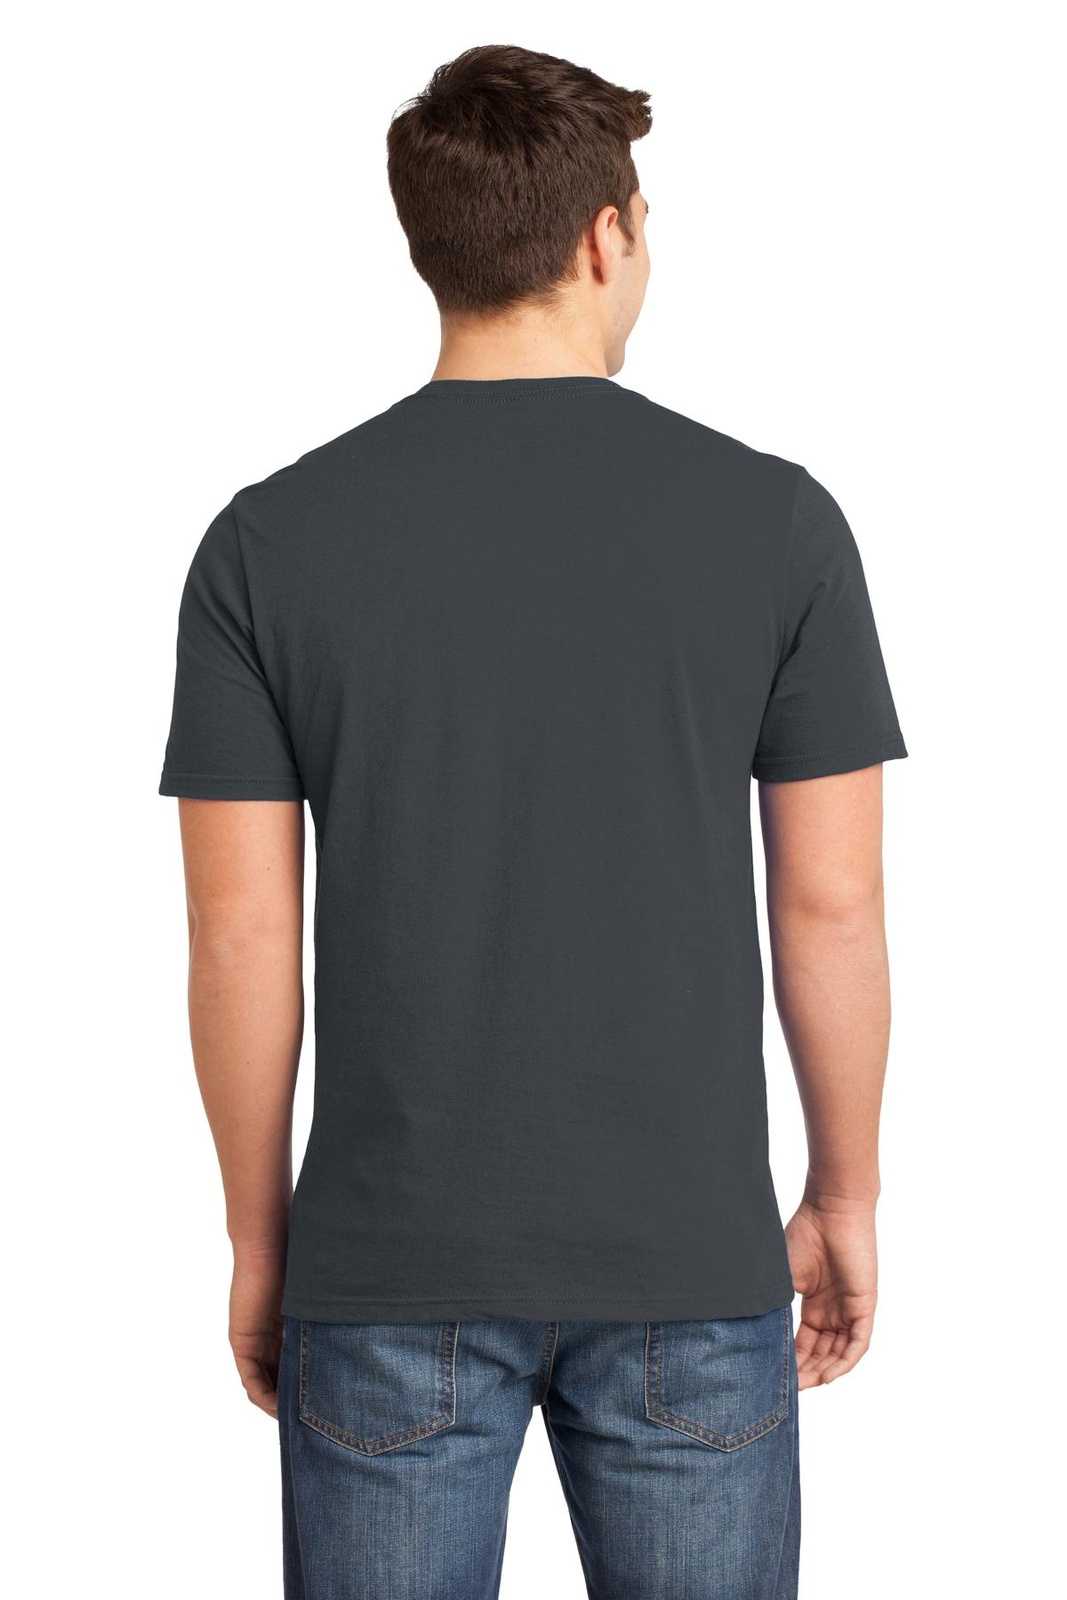 District DT6000 Very Important Tee - Charcoal - HIT a Double - 1